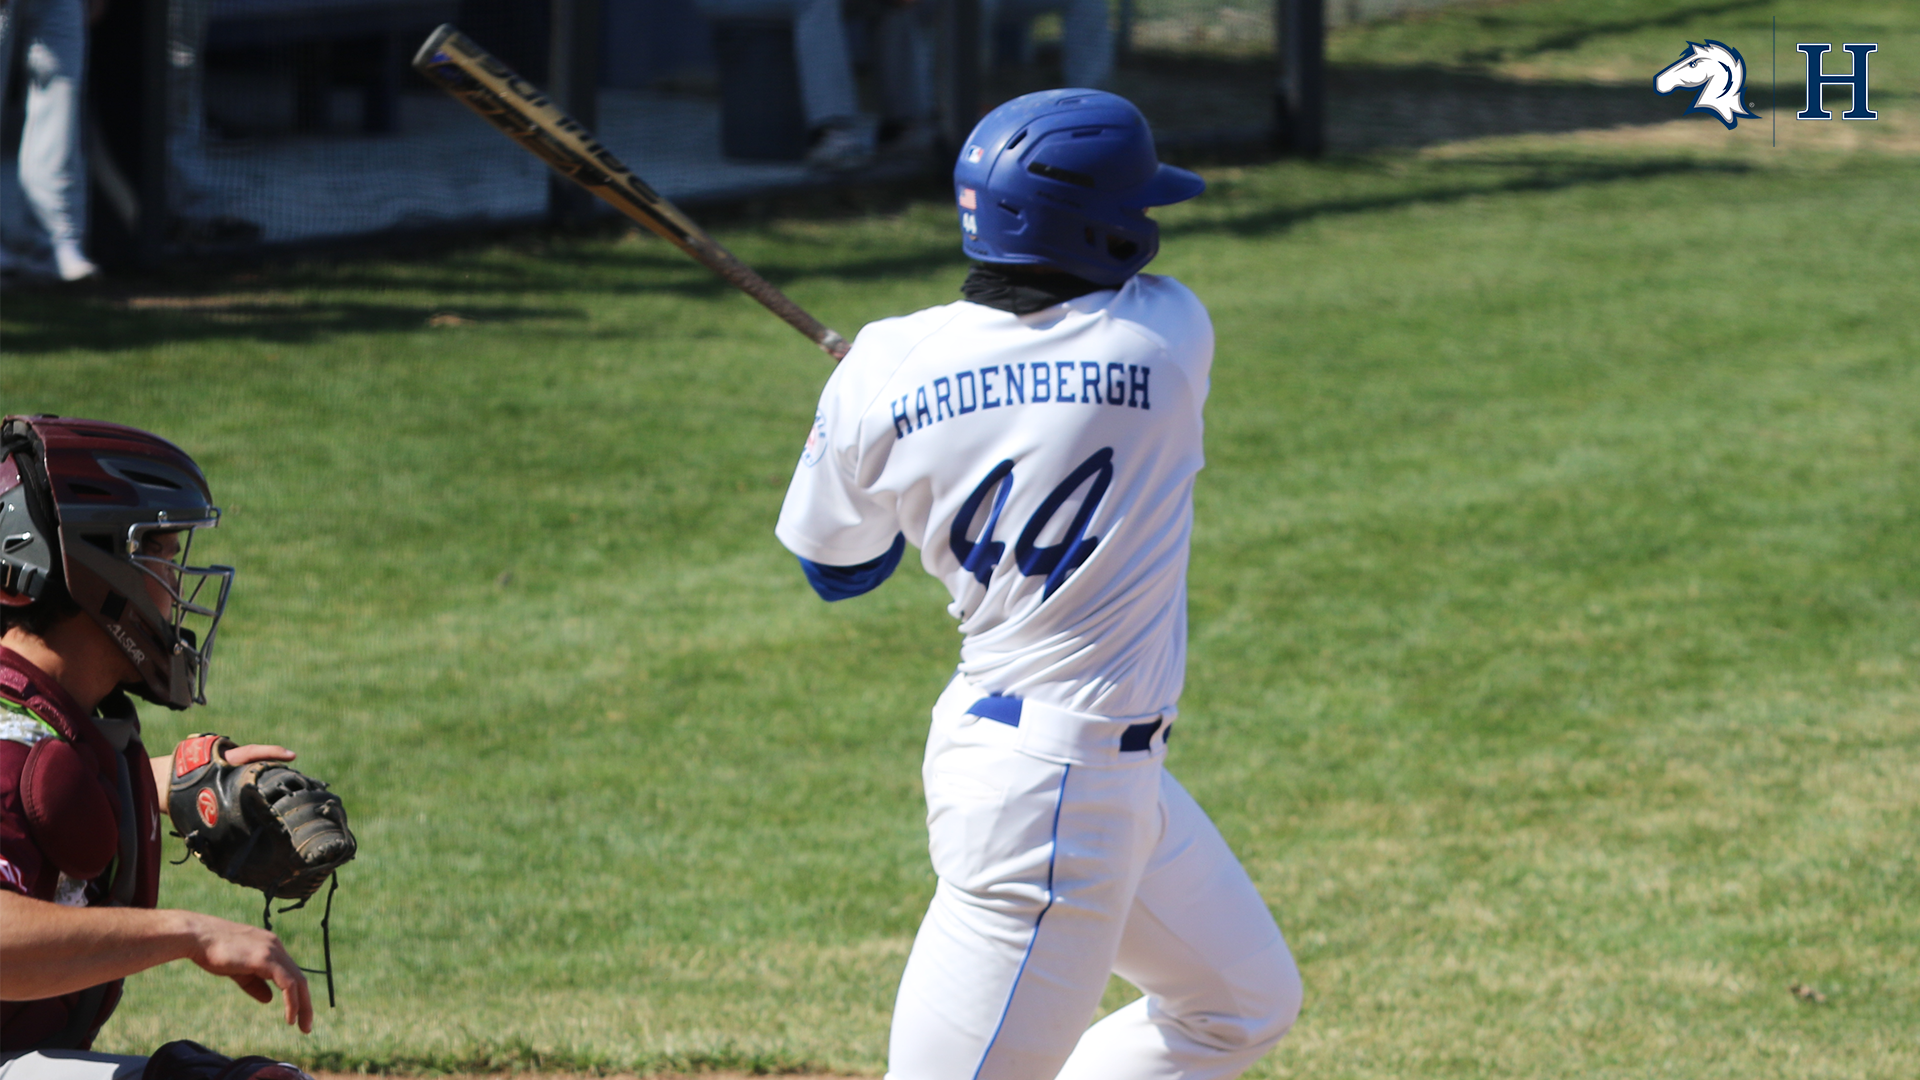 Hardenbergh ties record as Chargers split with visiting Cedarville